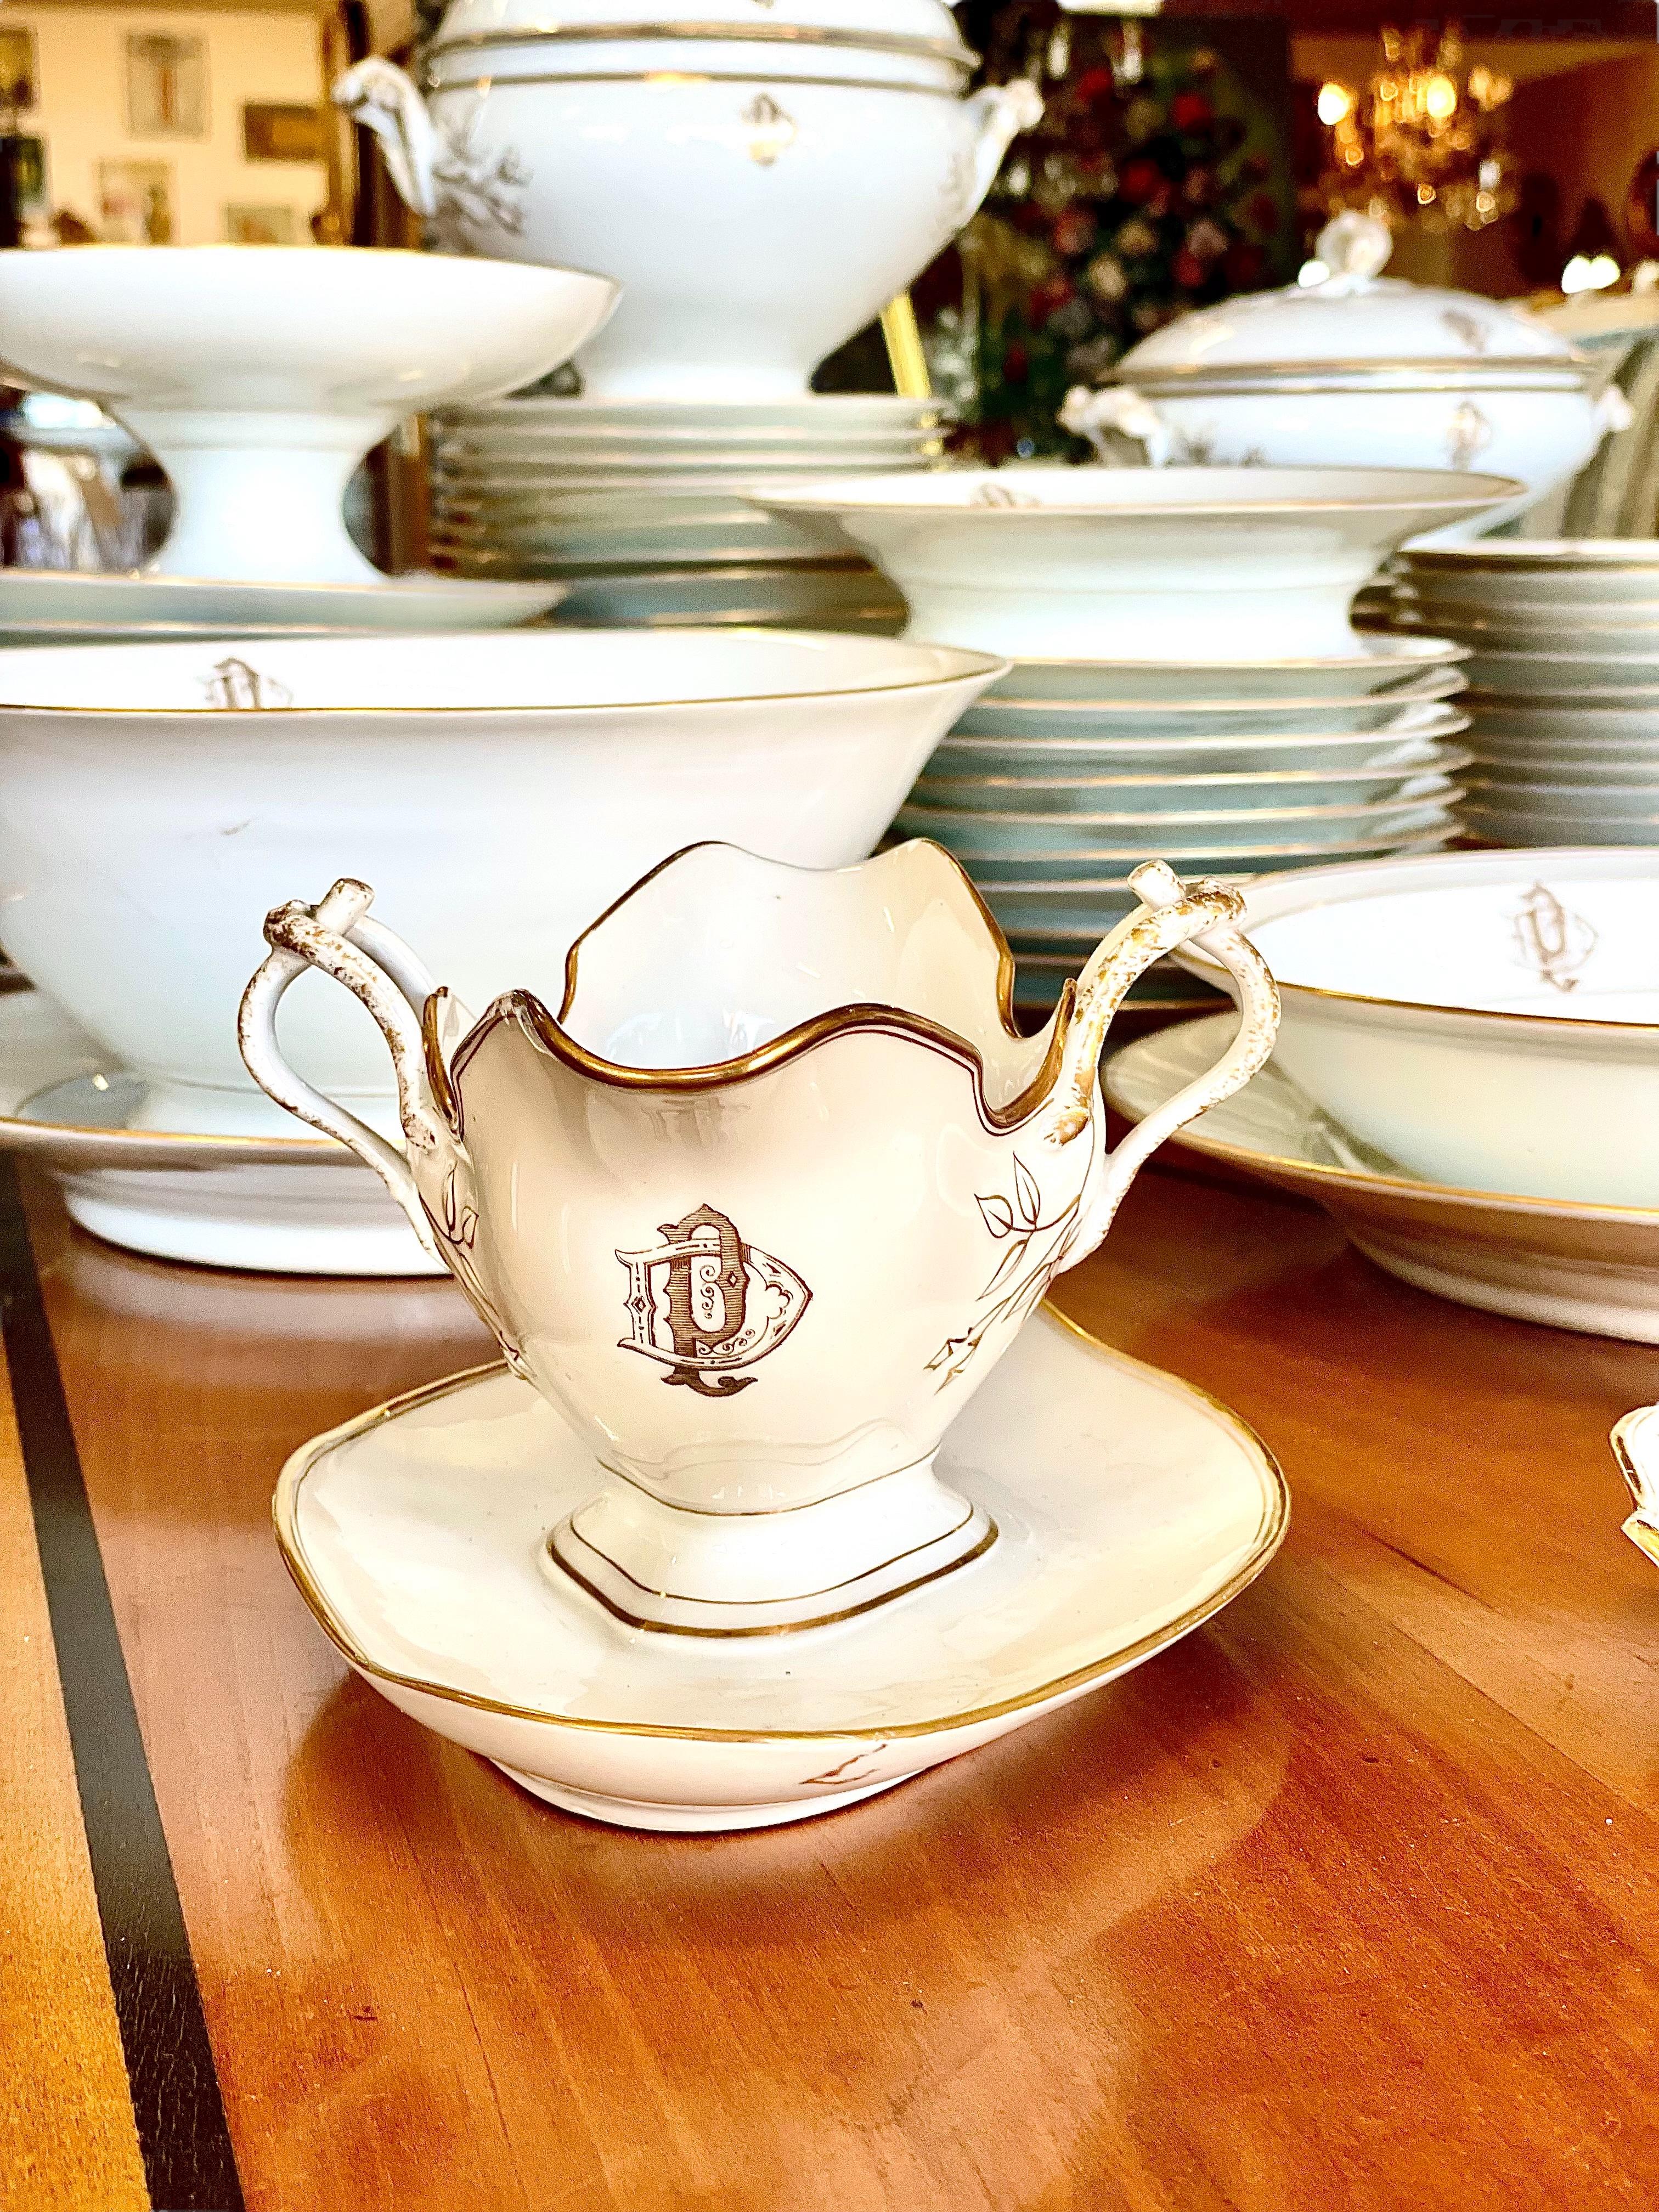 Limoges Porcelain Set of 50 Piece Dinner Service with Gilt Edges and Monogramme For Sale 1